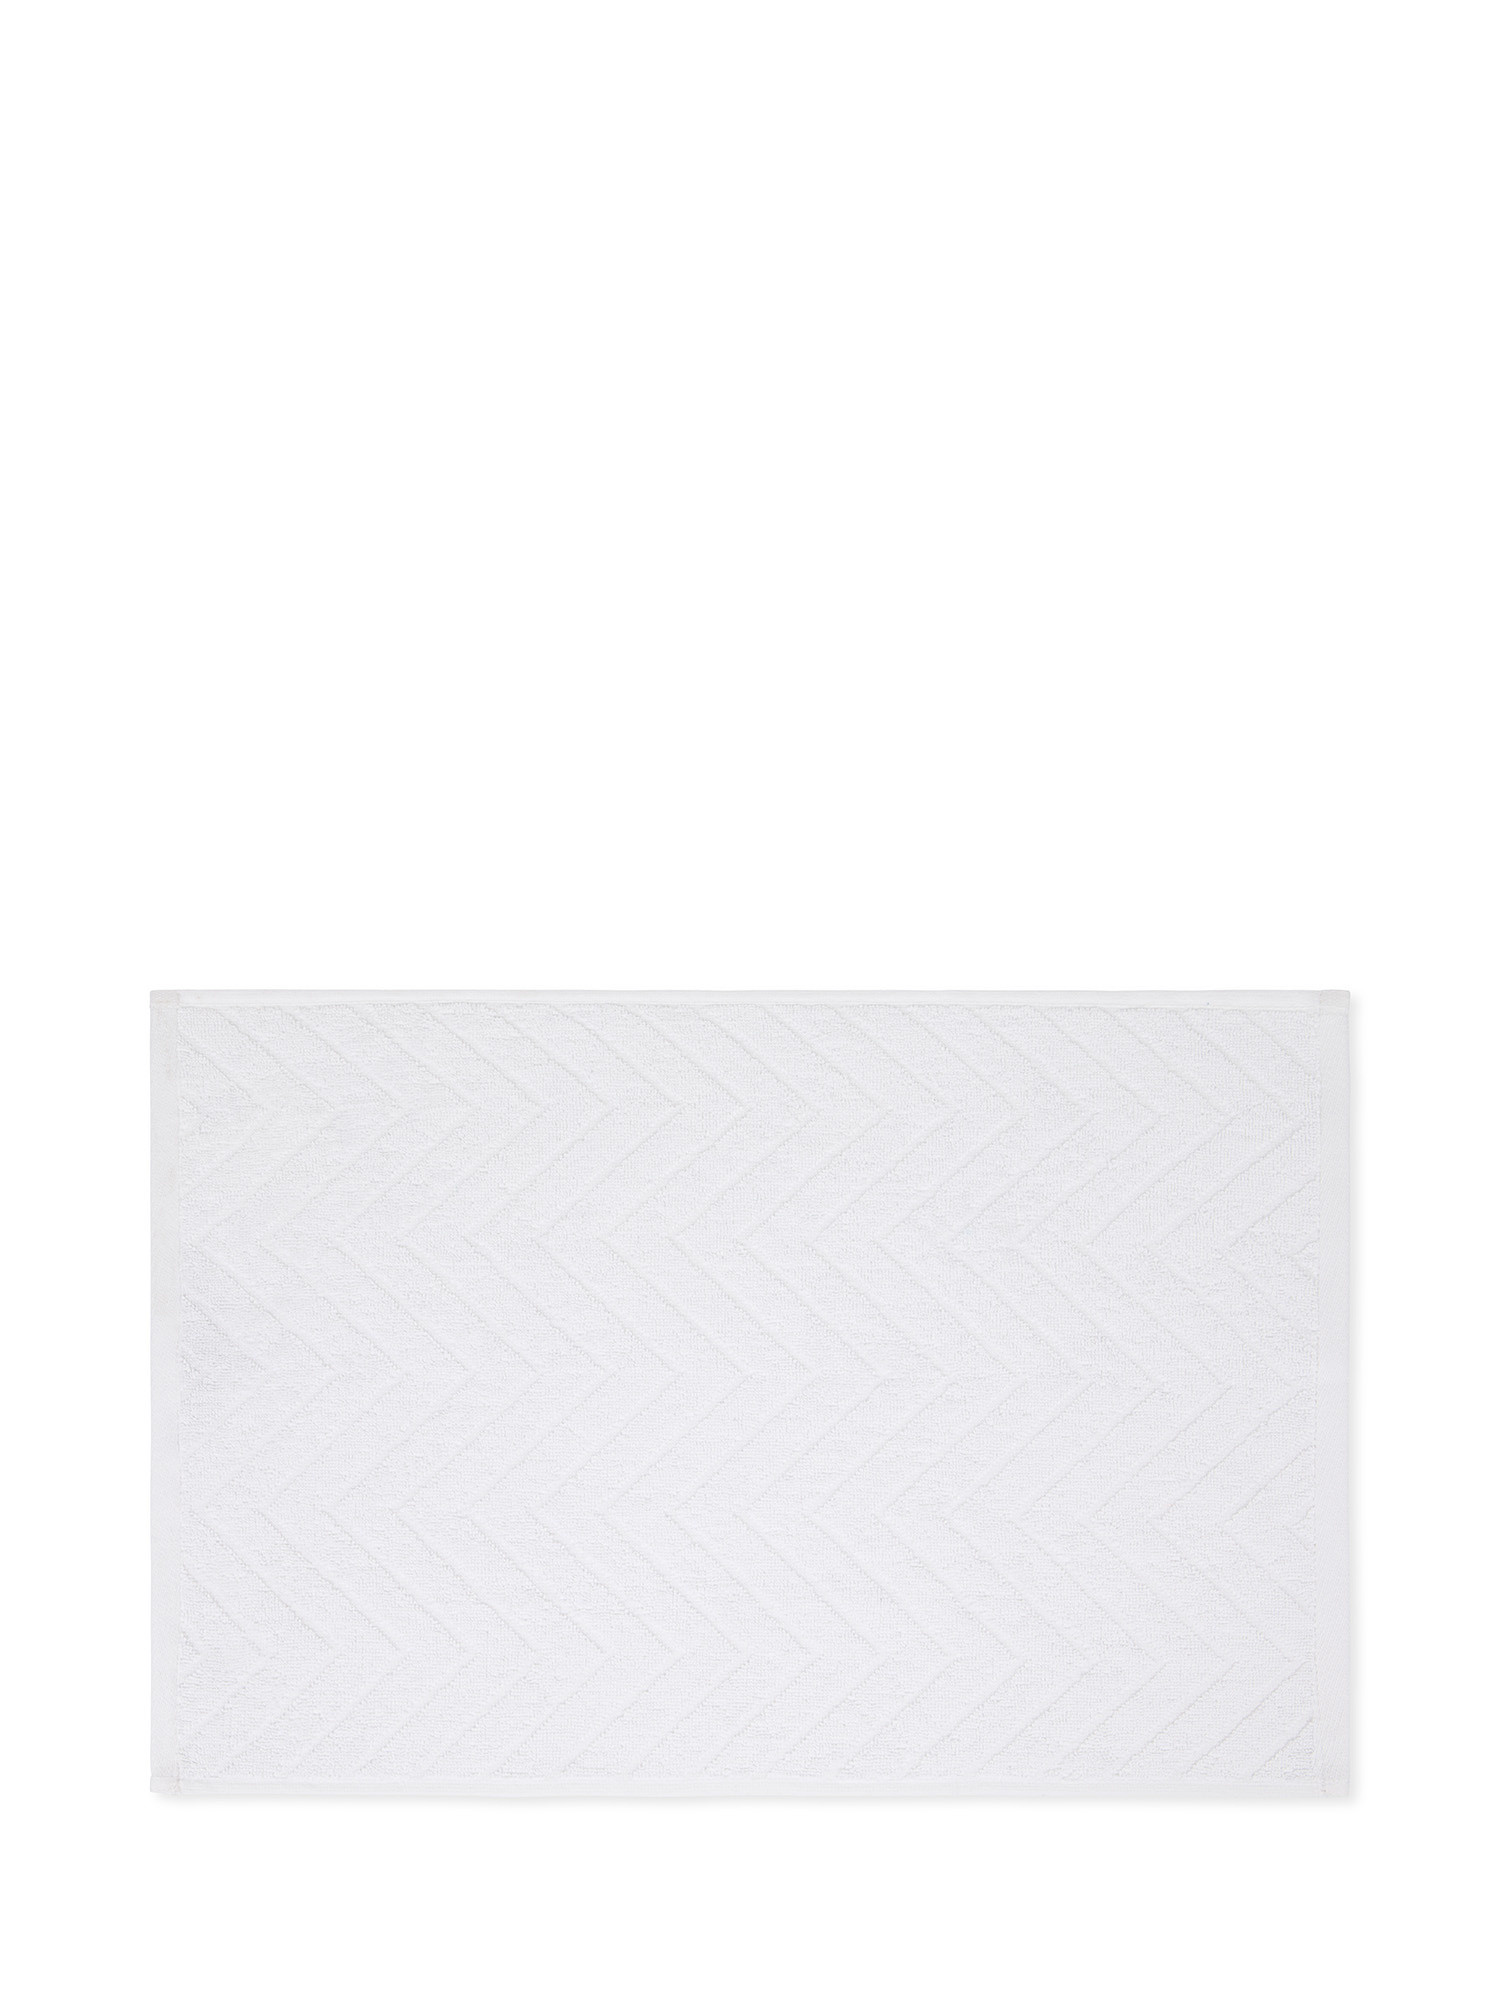 Cotton terry towel with Jacquard design, White, large image number 1